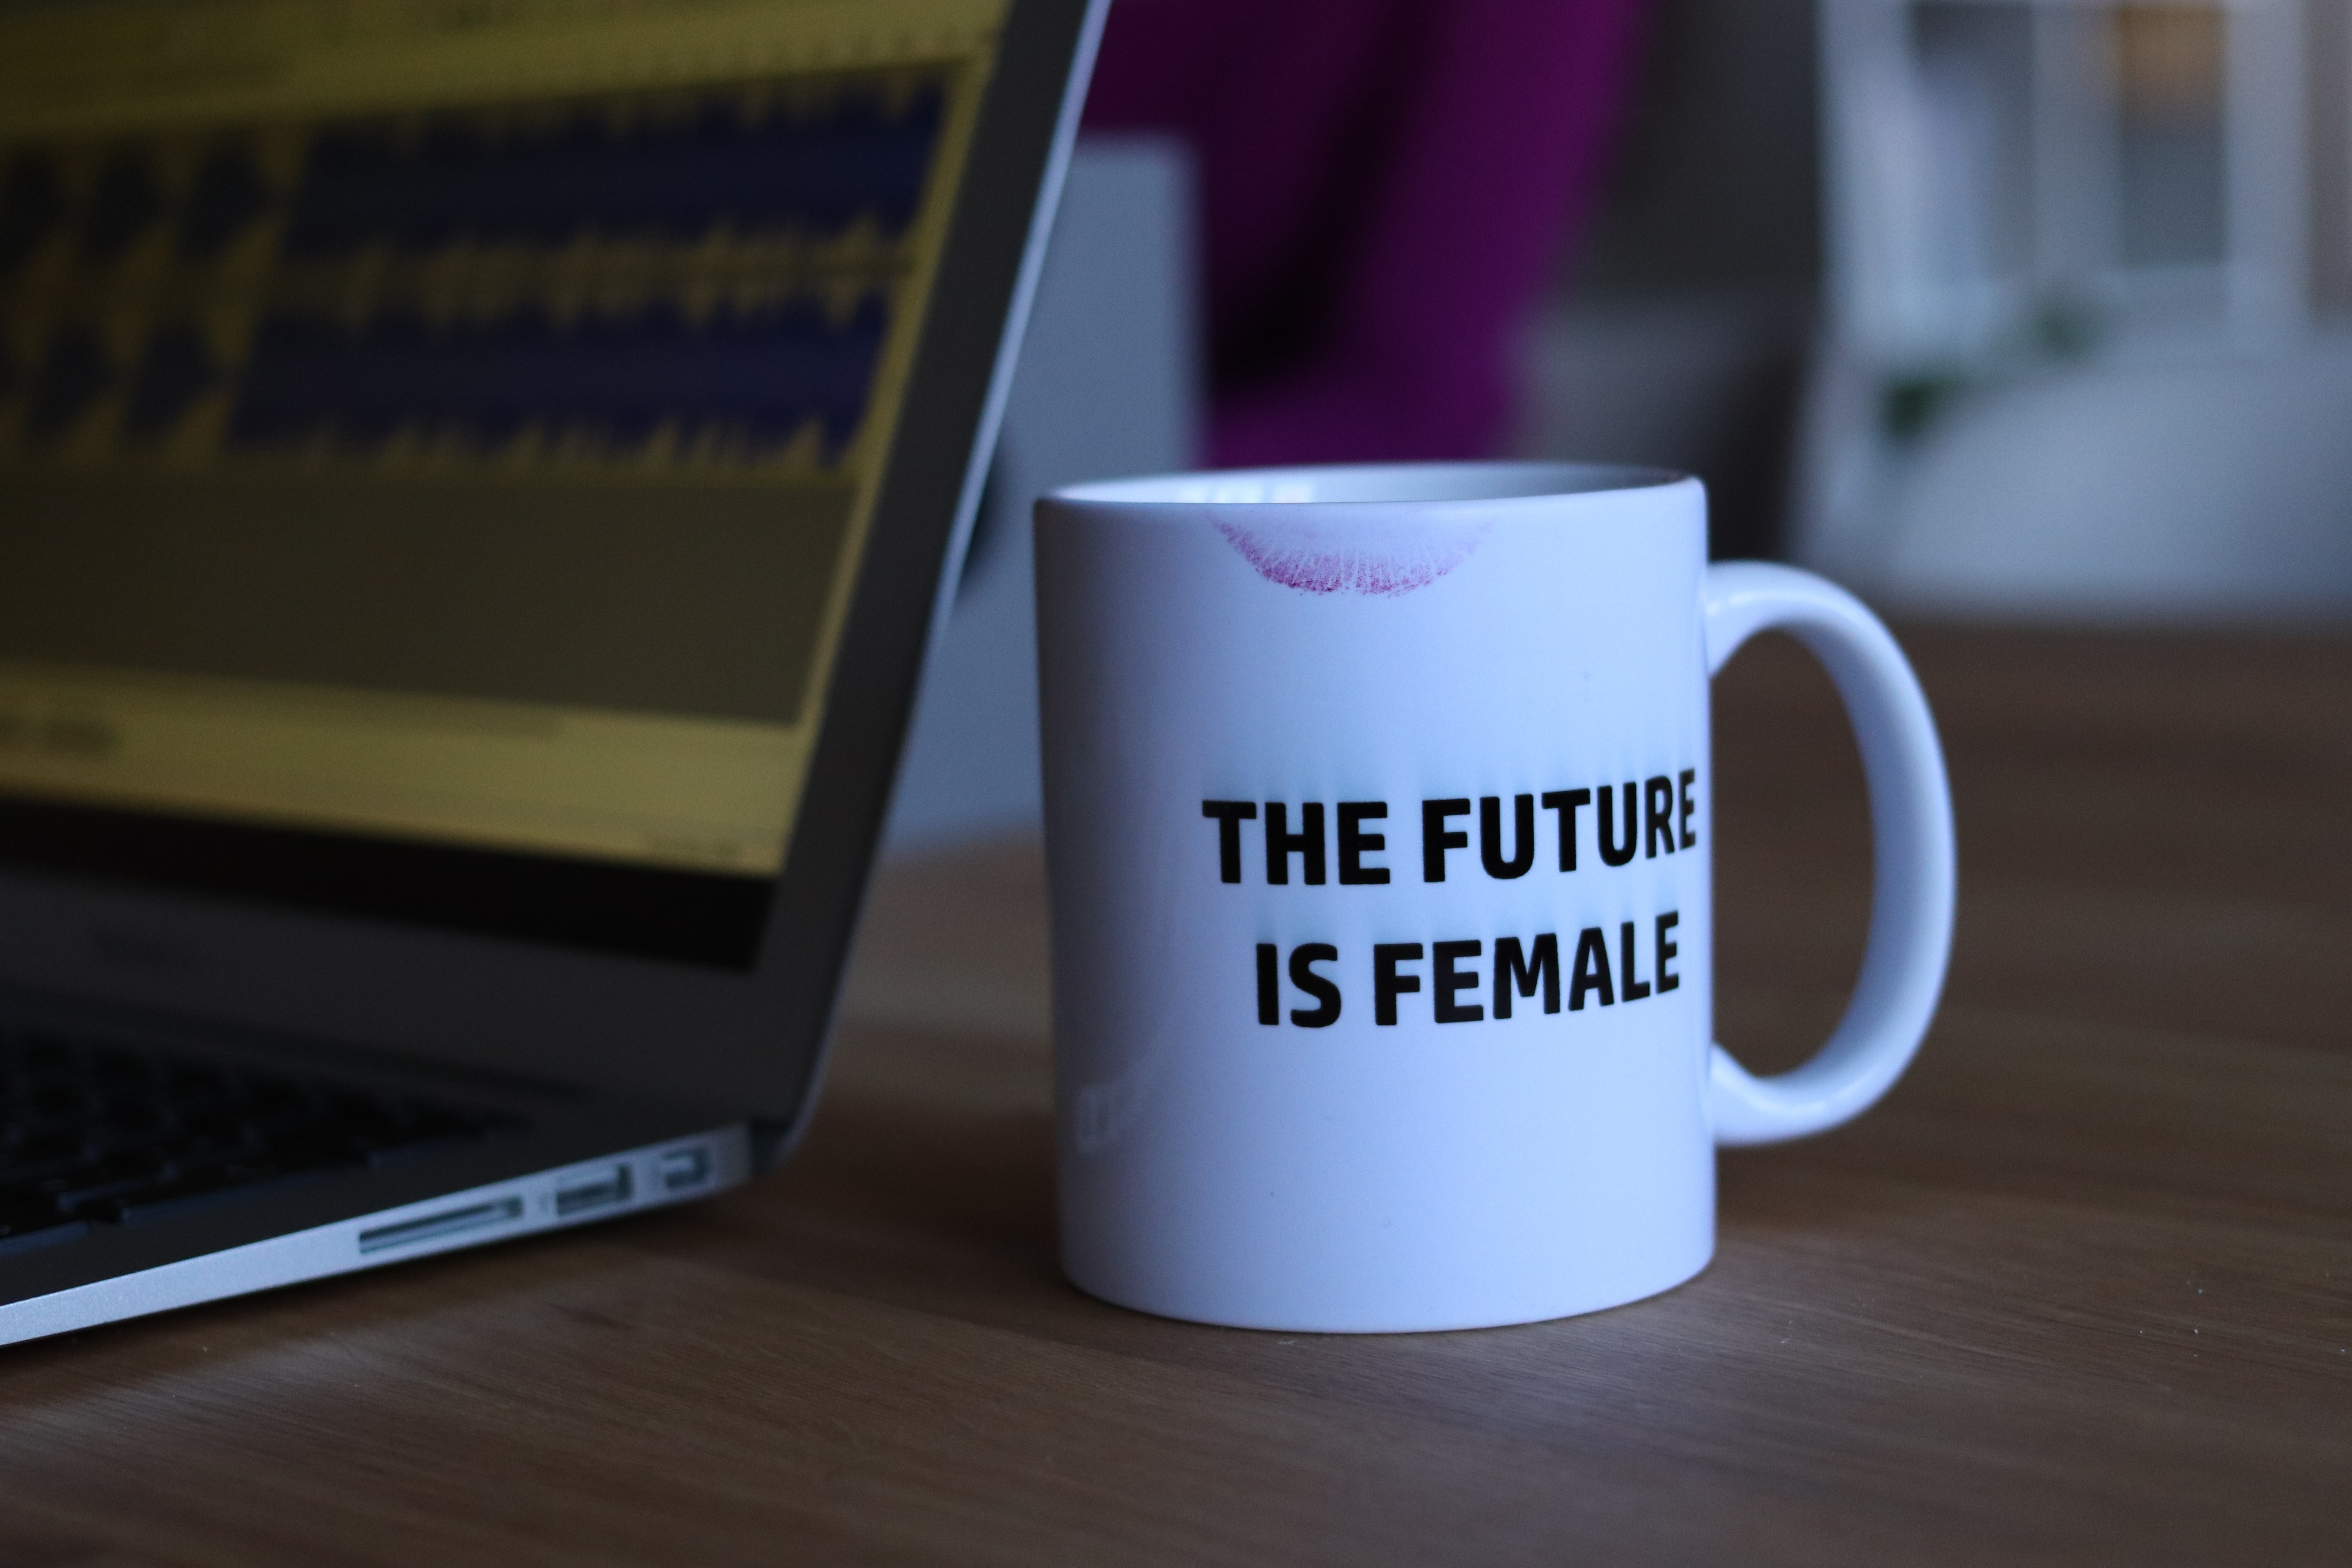 “The Future Is Female” is canceled. Take up space now